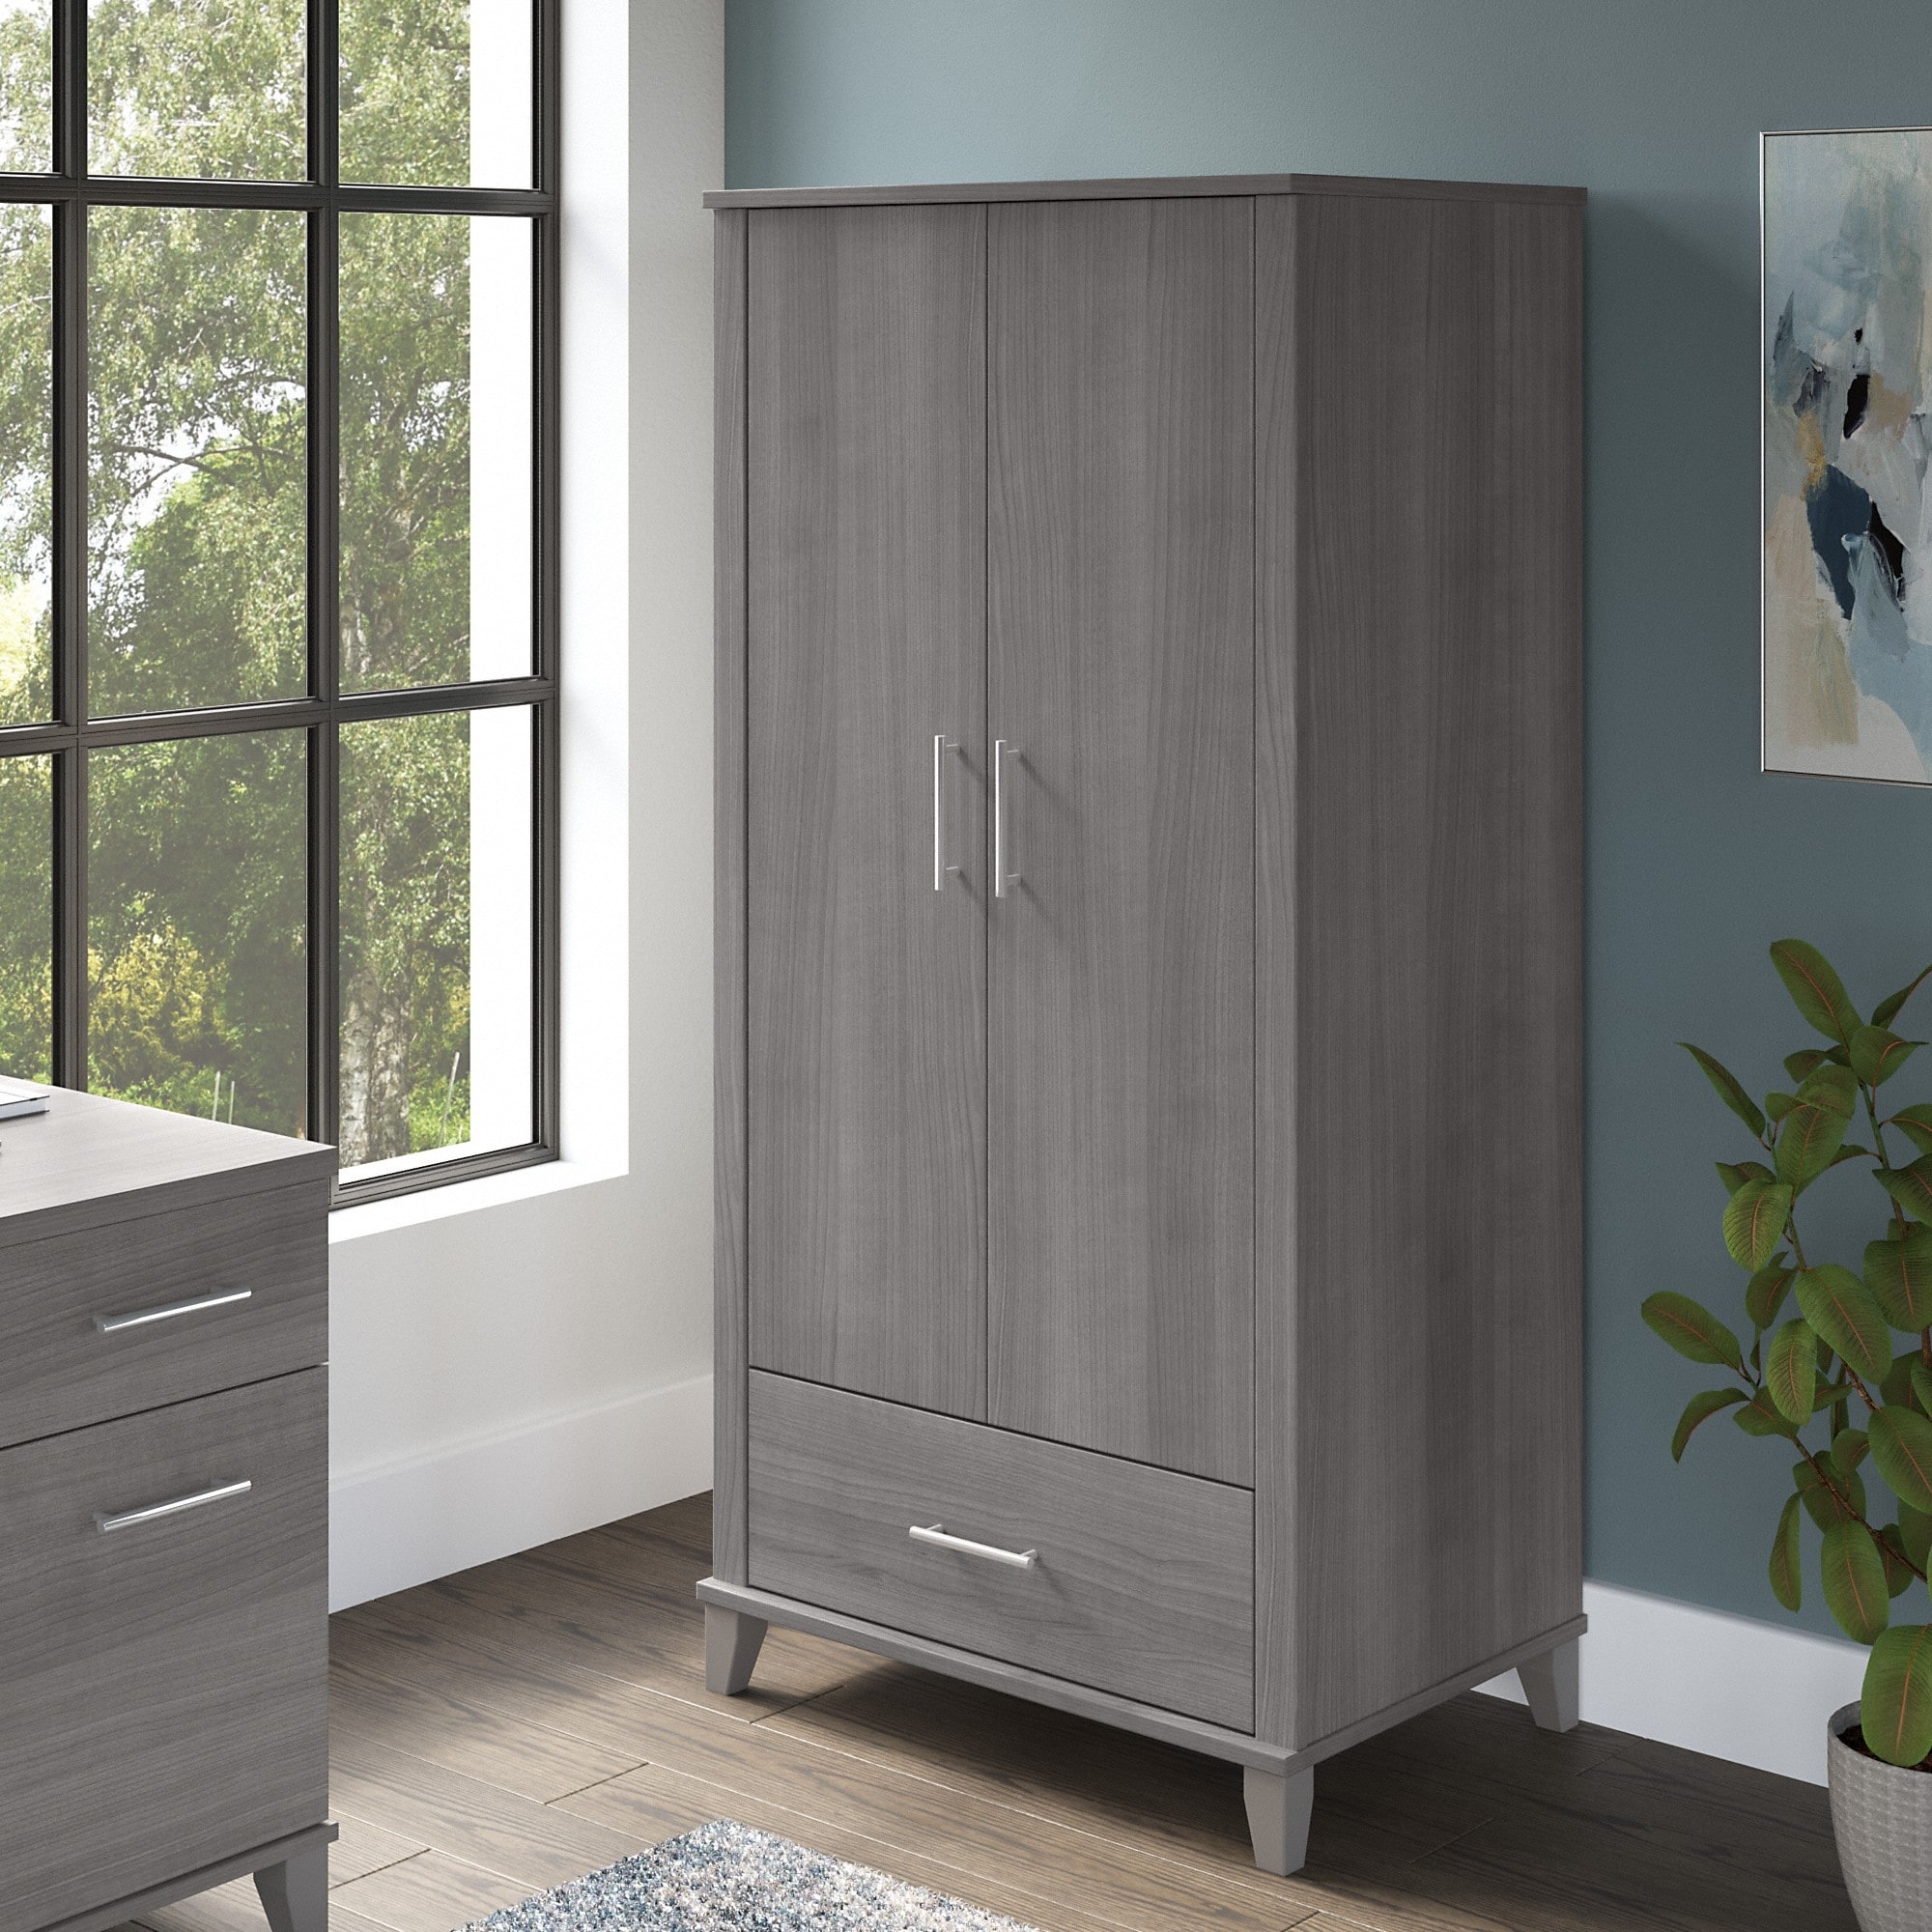 https://ak1.ostkcdn.com/images/products/is/images/direct/2bdf1cb7ab84eefea183d2bb5bead395b3575fd1/Somerset-Tall-Storage-Cabinet-with-Doors-and-Drawer-by-Bush-Furniture.jpg